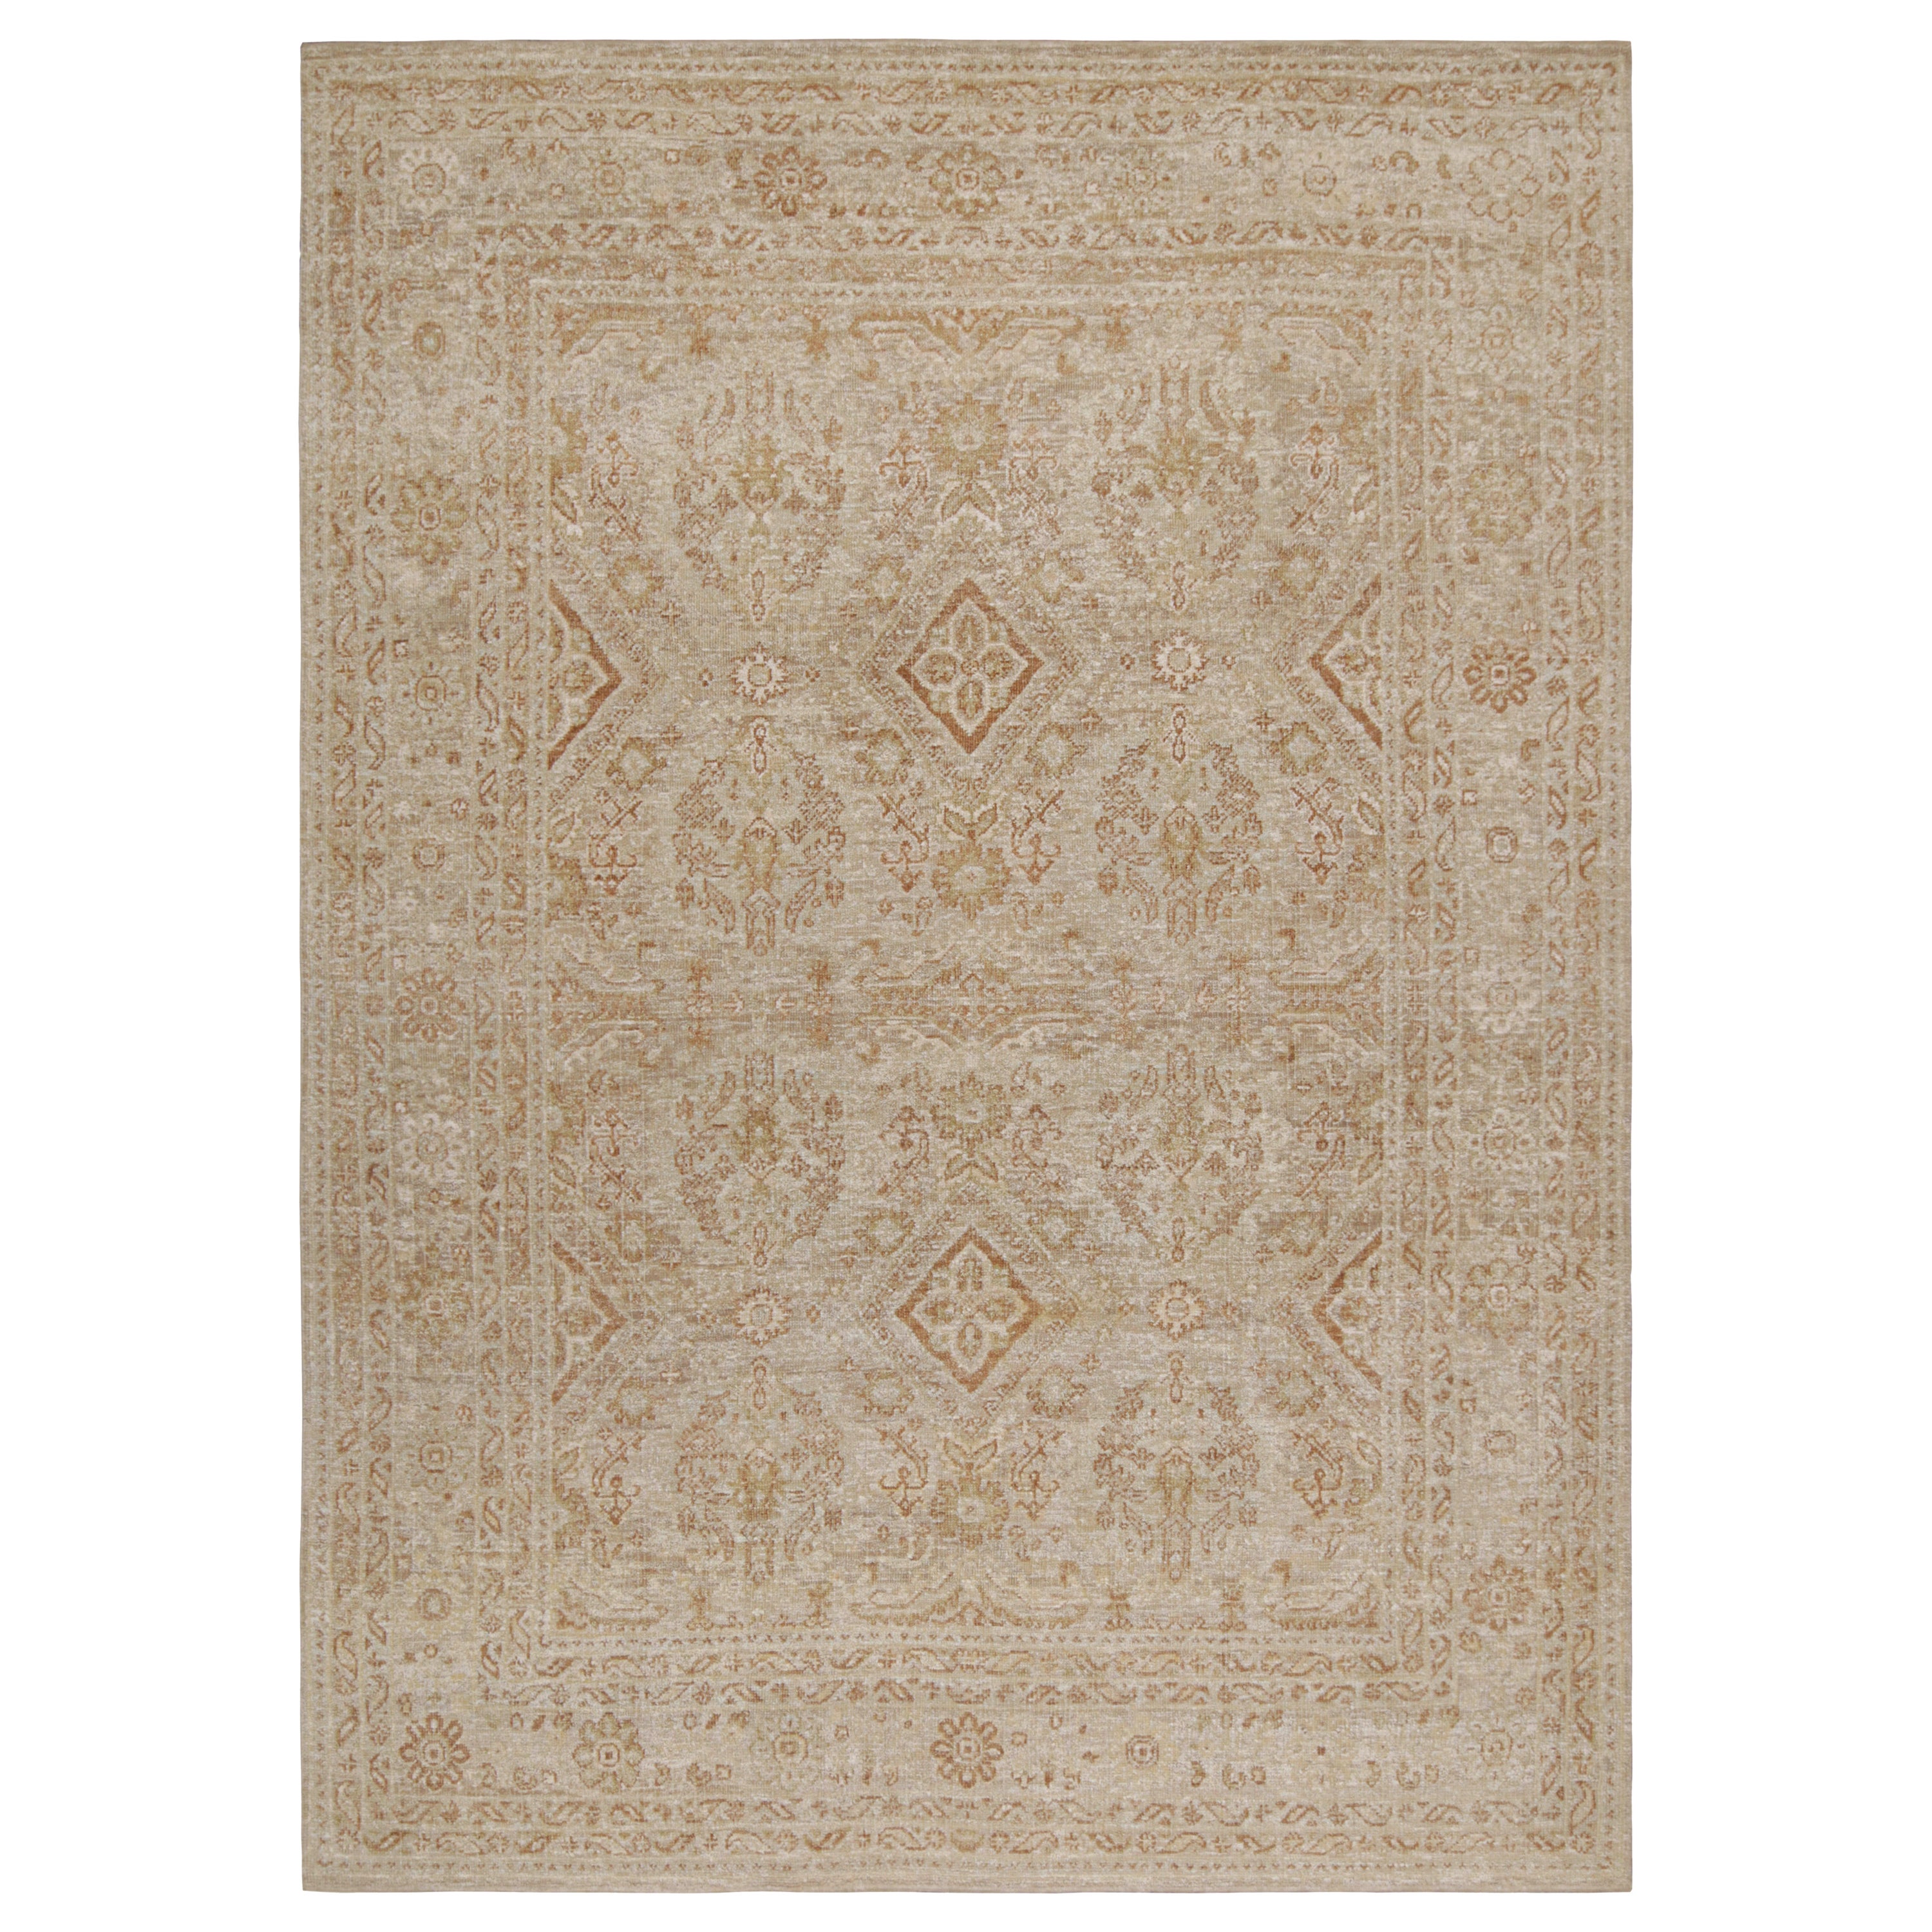 Rug & Kilim’s Oushak Style Rug in Beige-Brown & White Geometric Patterns For Sale